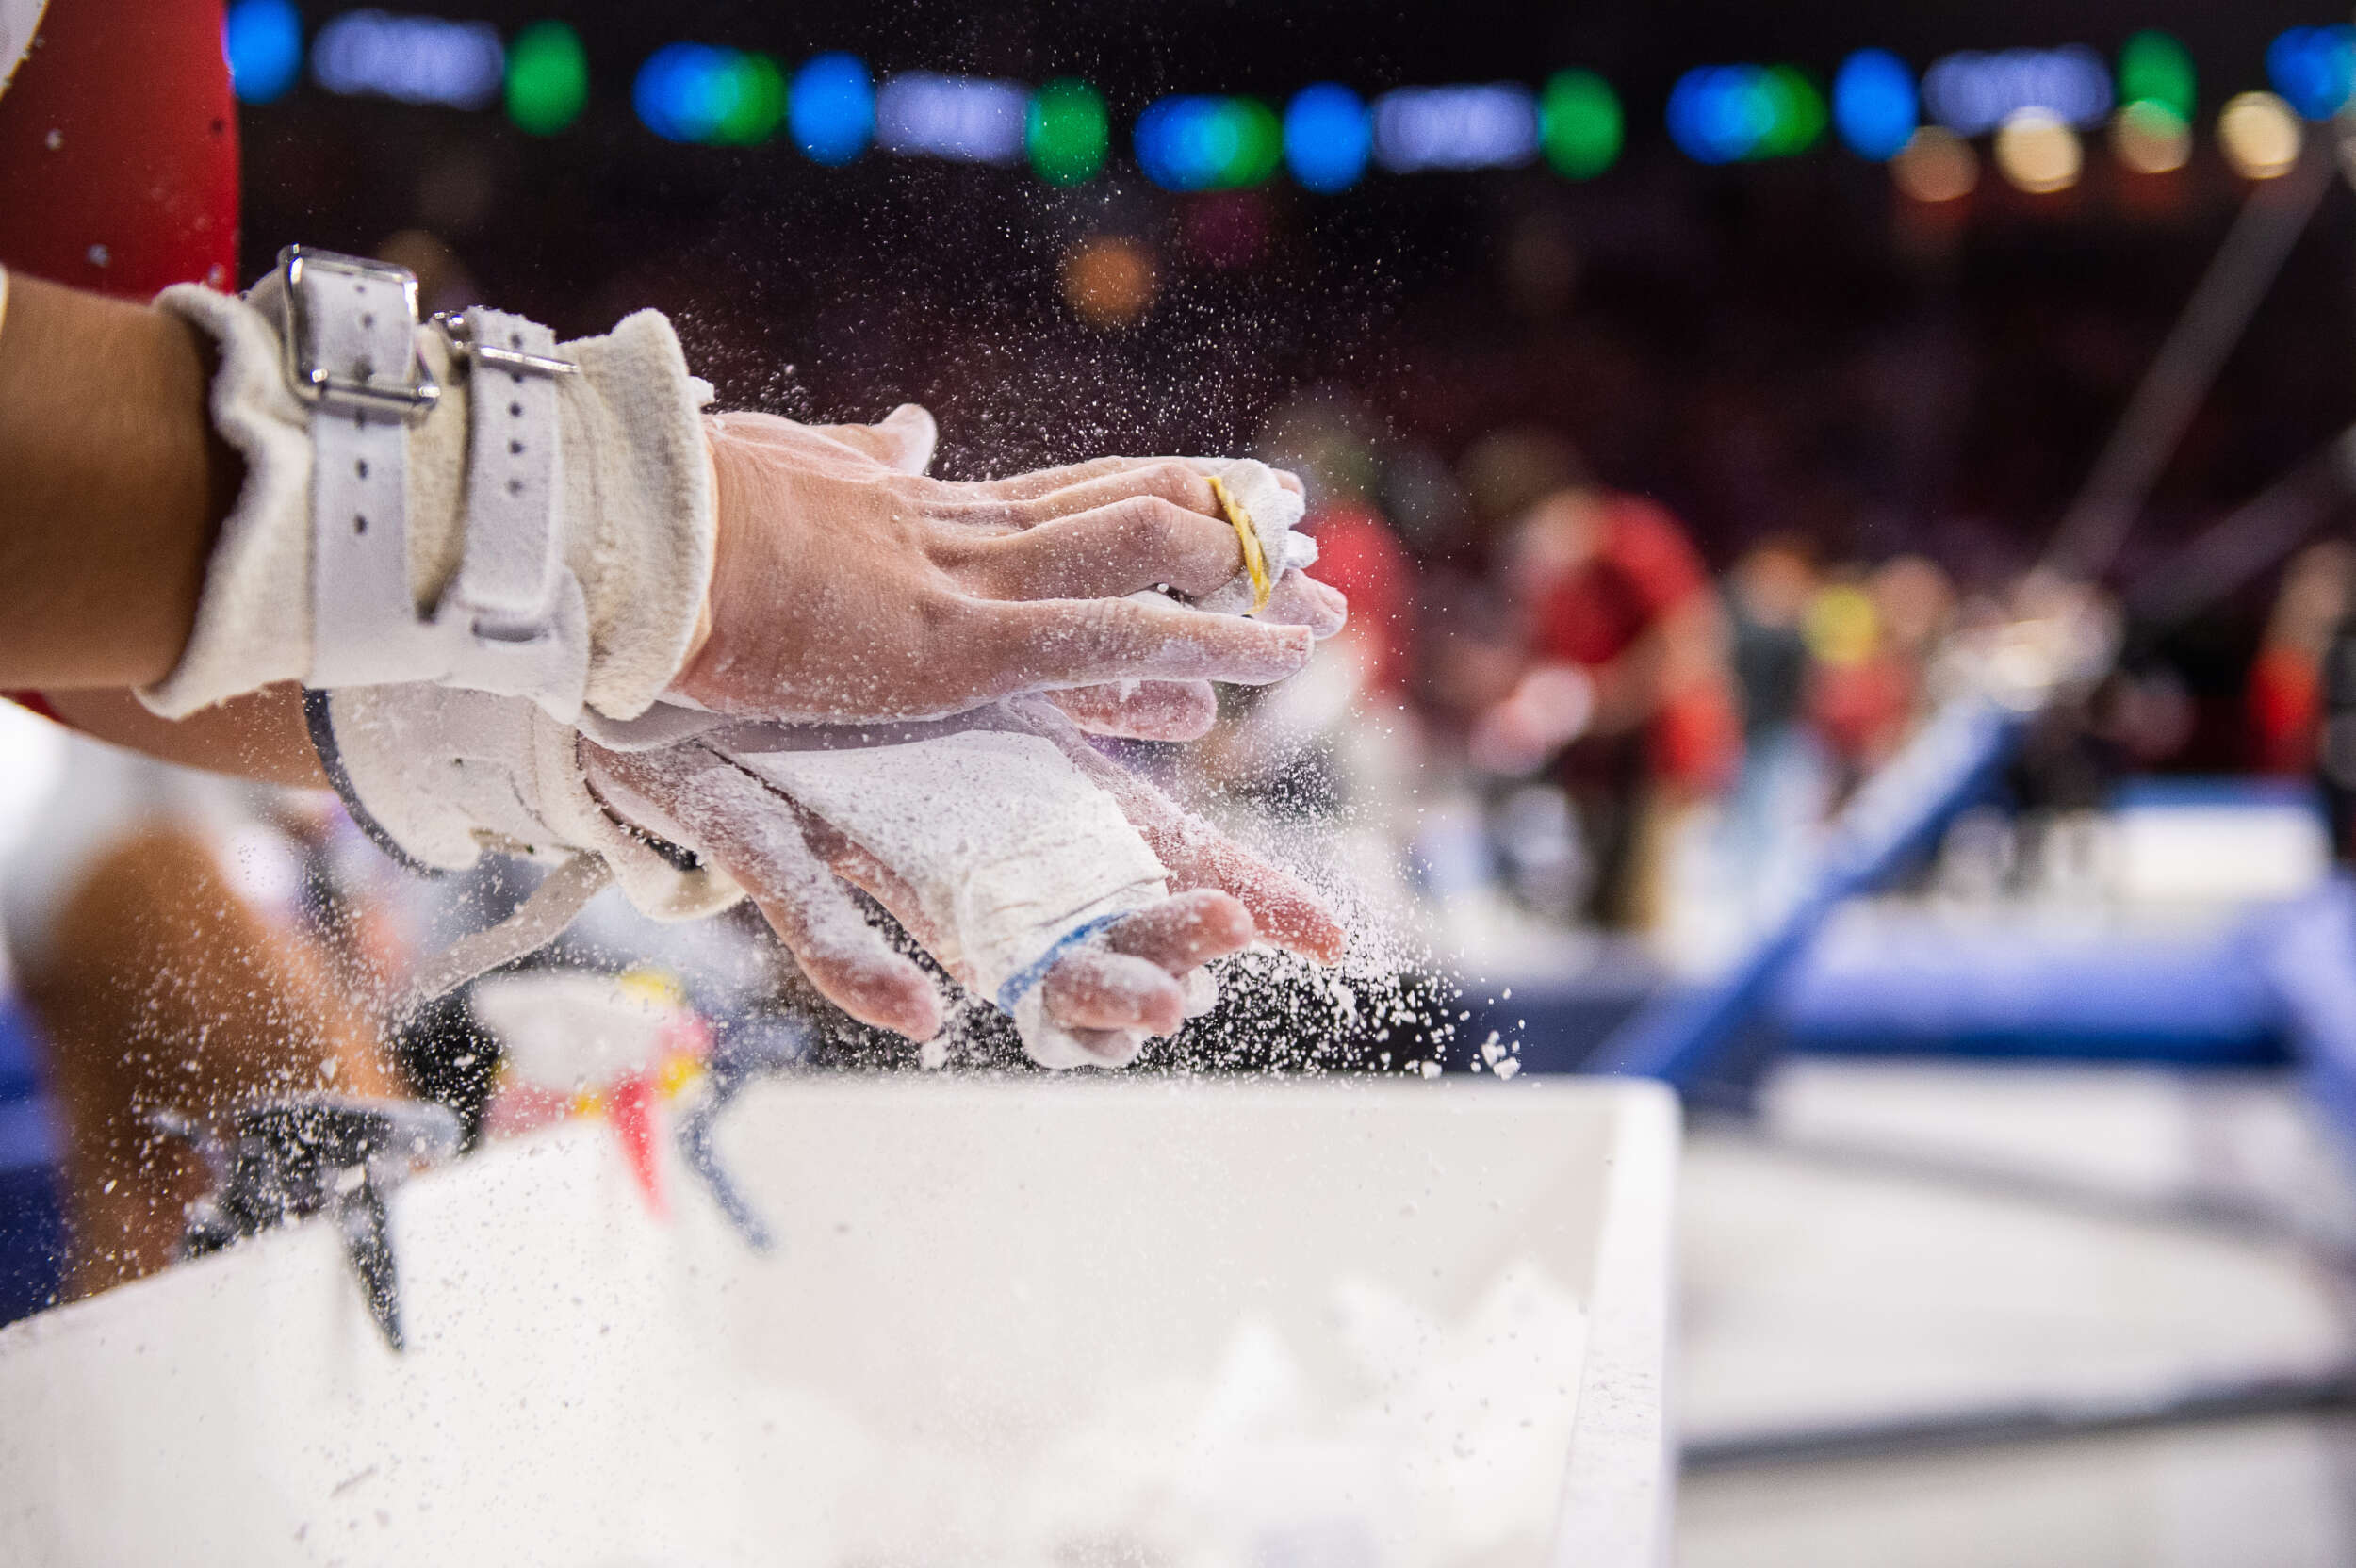 TV Schedule, Times Released for 2023 Gymnastics Season